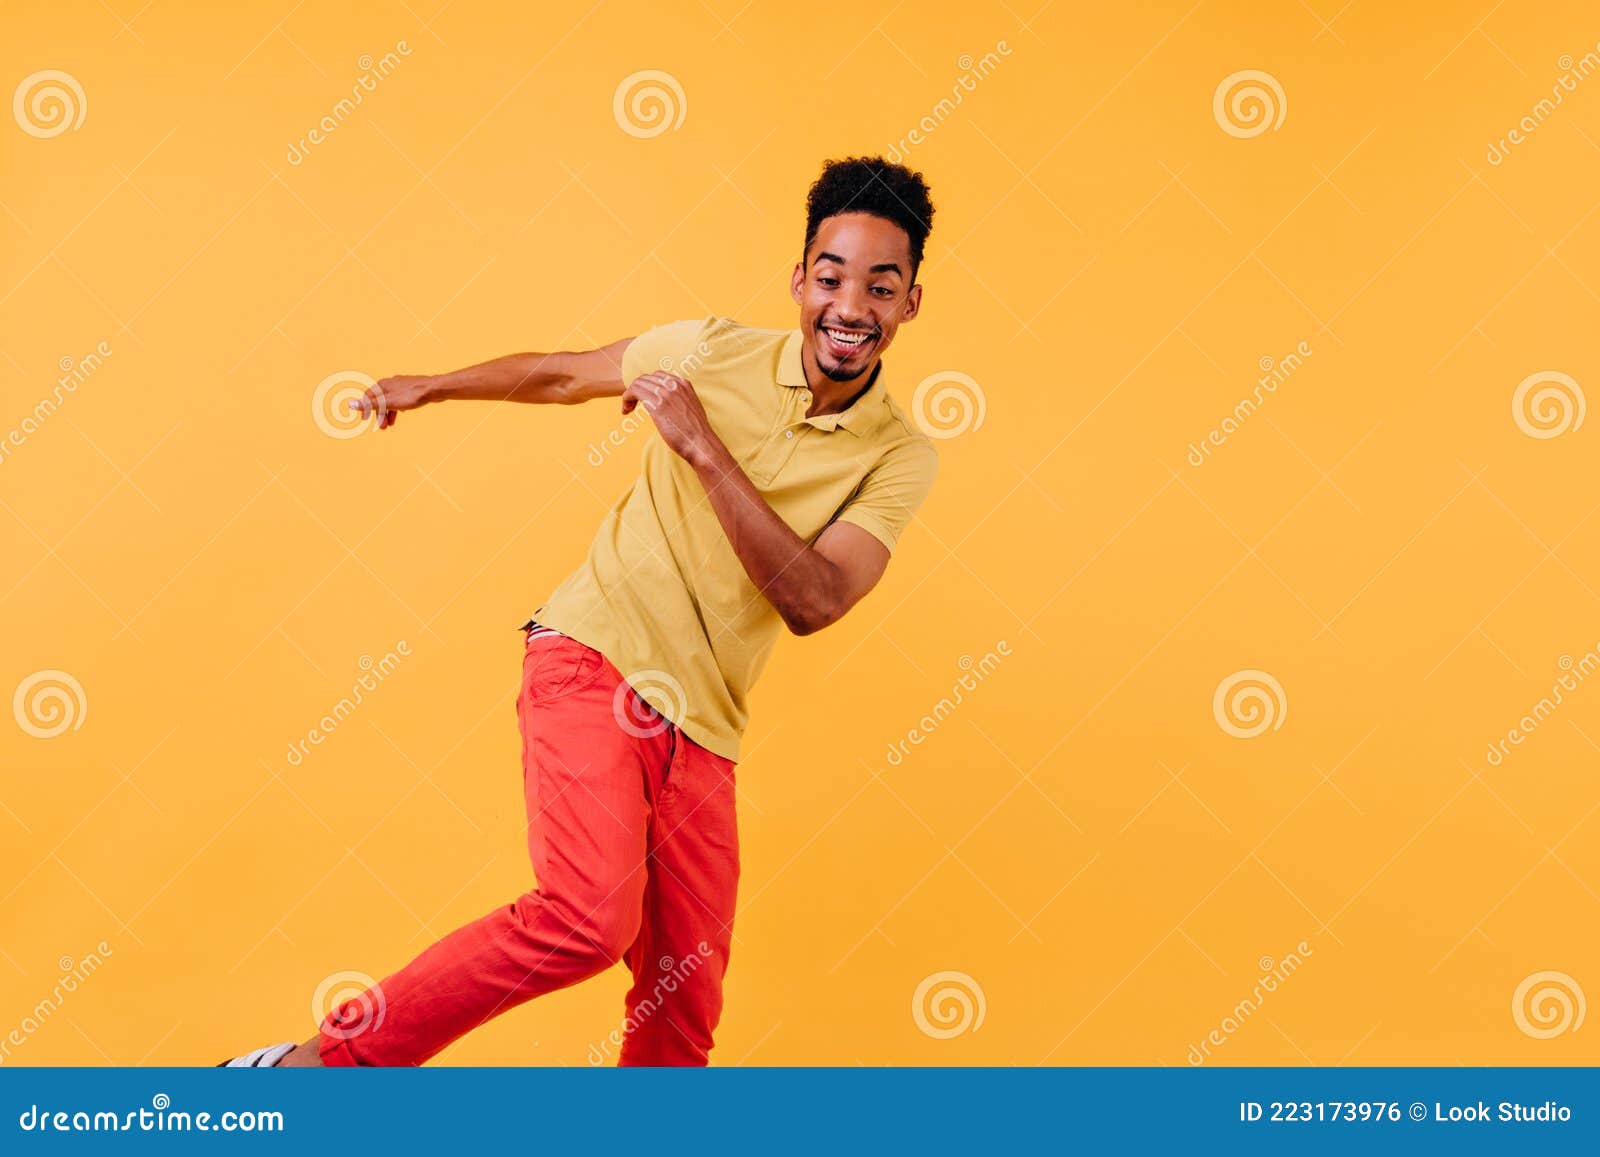 Carefree African Guy Dancing with Excitement. Studio Portrait of ...